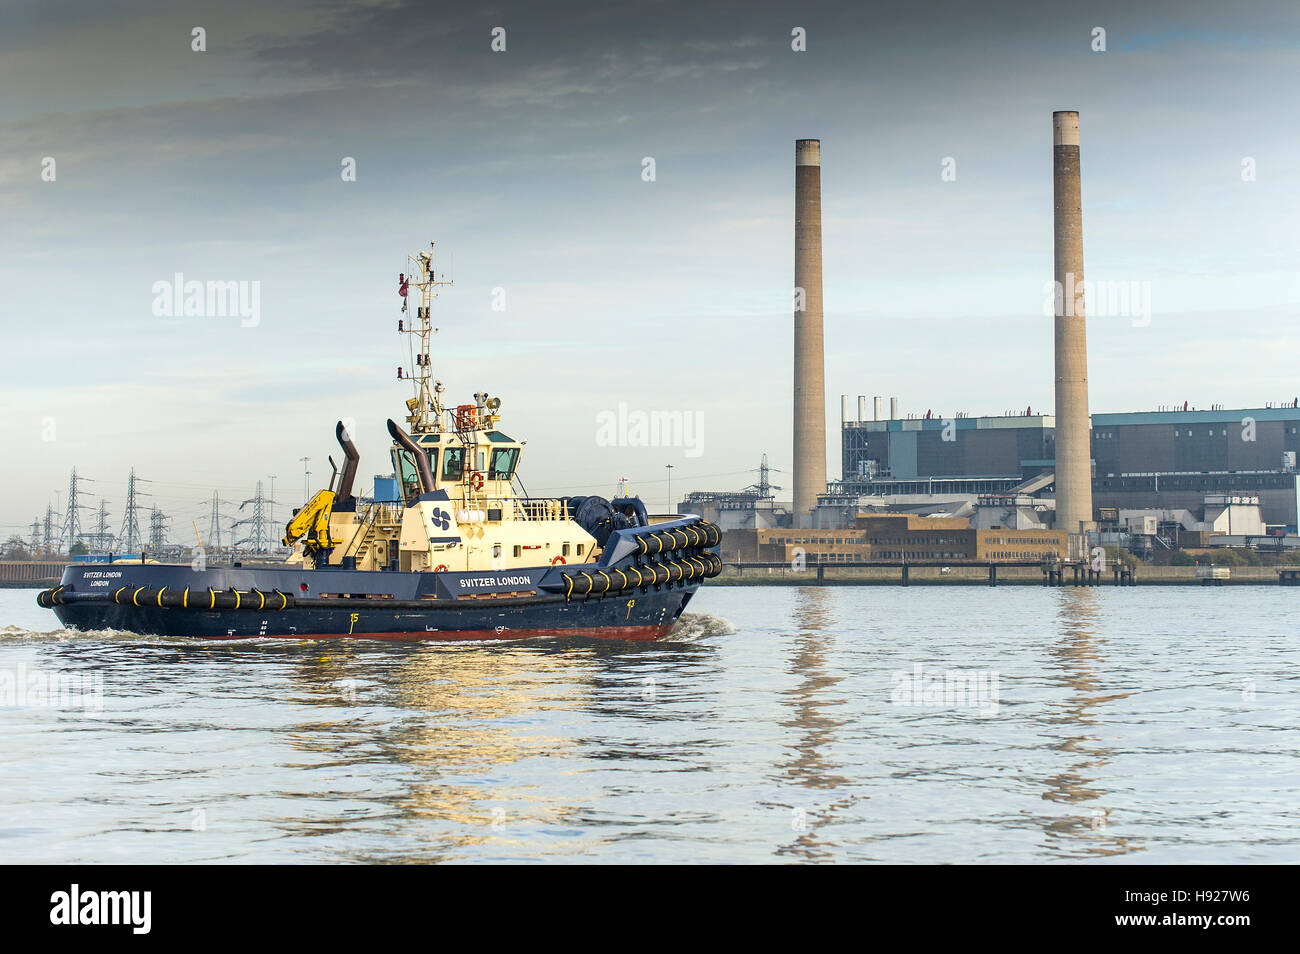 The tug Switzer London passes Tilbury B power station in Essex as it steams downriver on the River Thames. Stock Photo